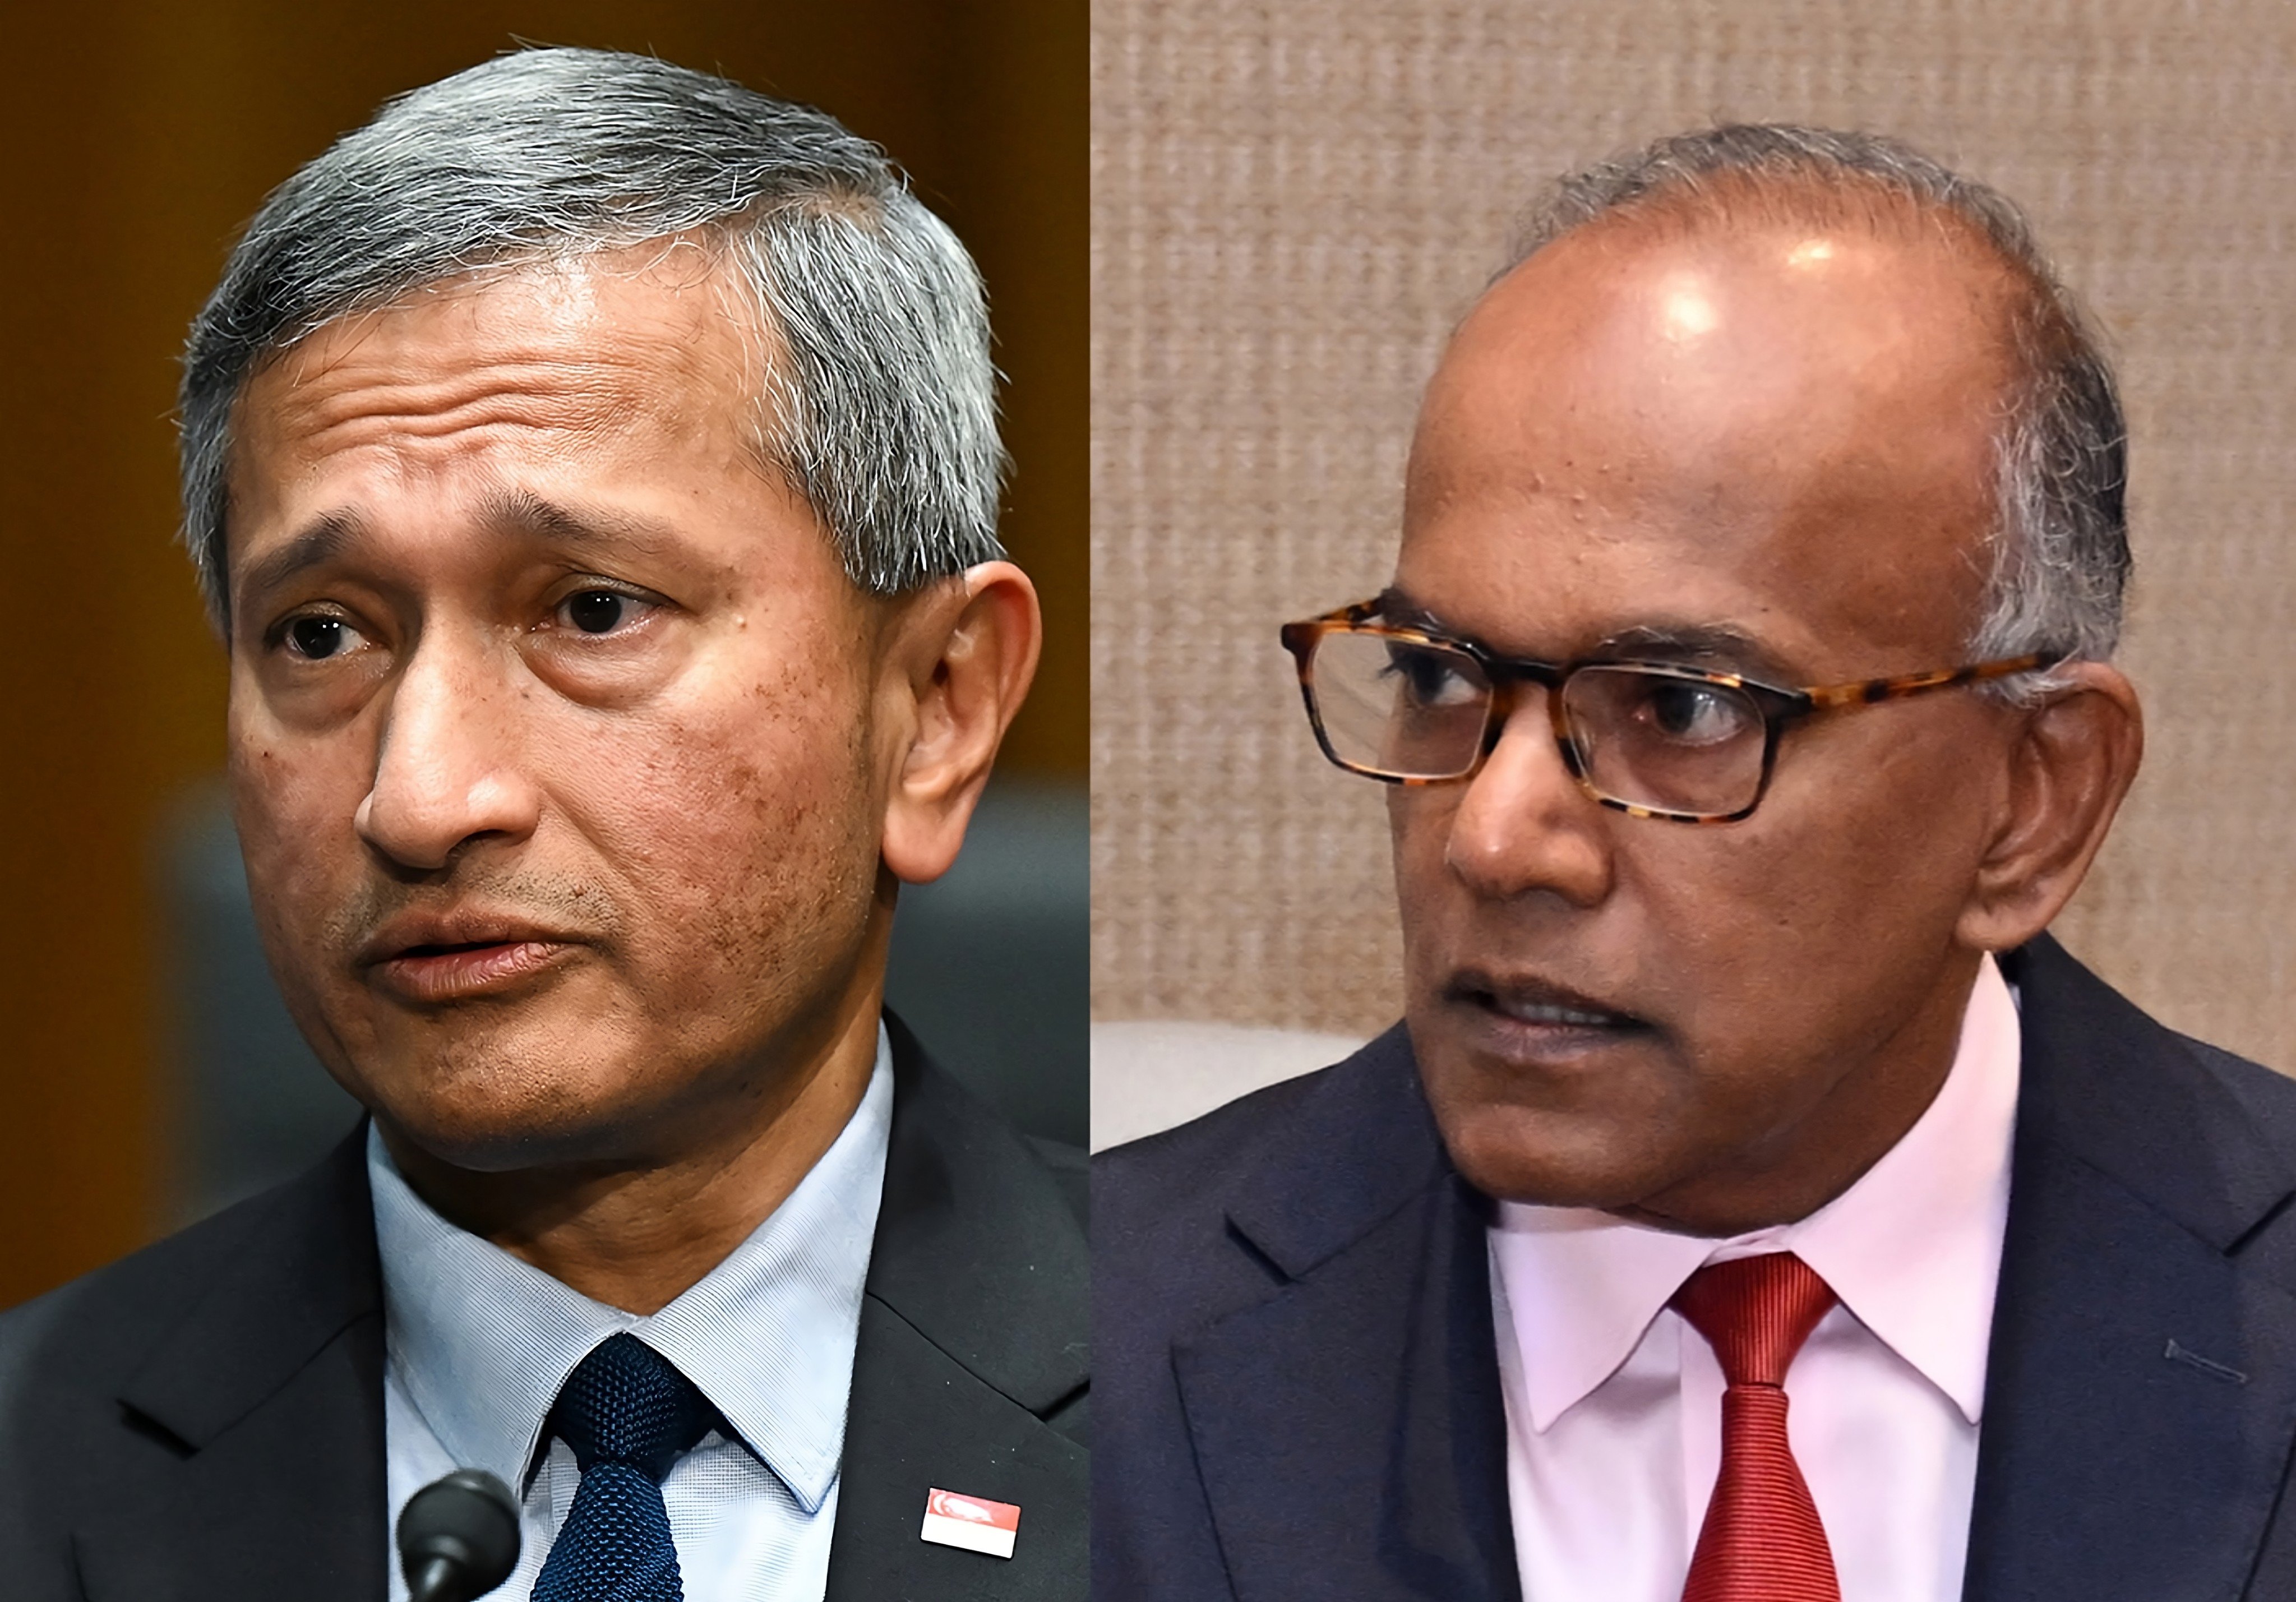 Singapore’s Foreign Minister Vivian Balakrishnan (left) and Law Minister K. Shanmugam are seen in this composite picture. Photo: dpa, SCMP